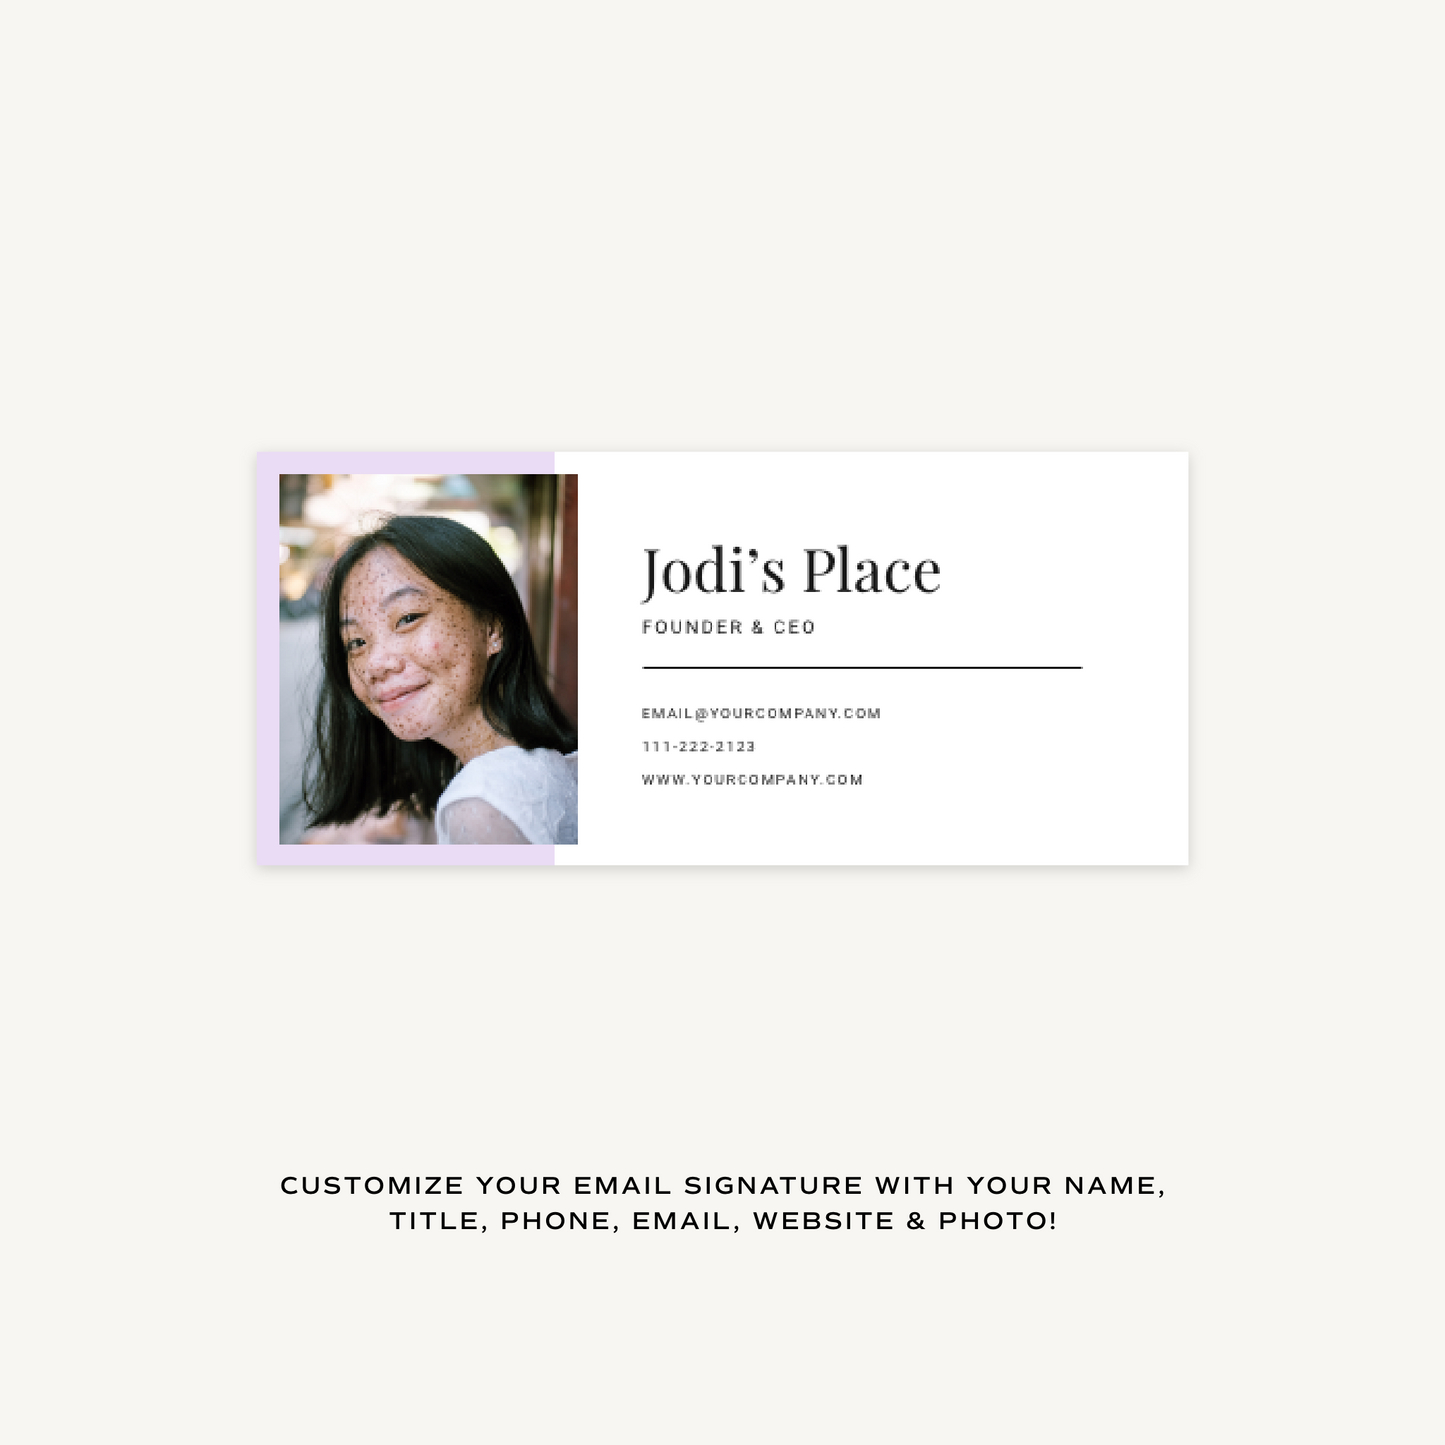 Jodi Email Signature Collection